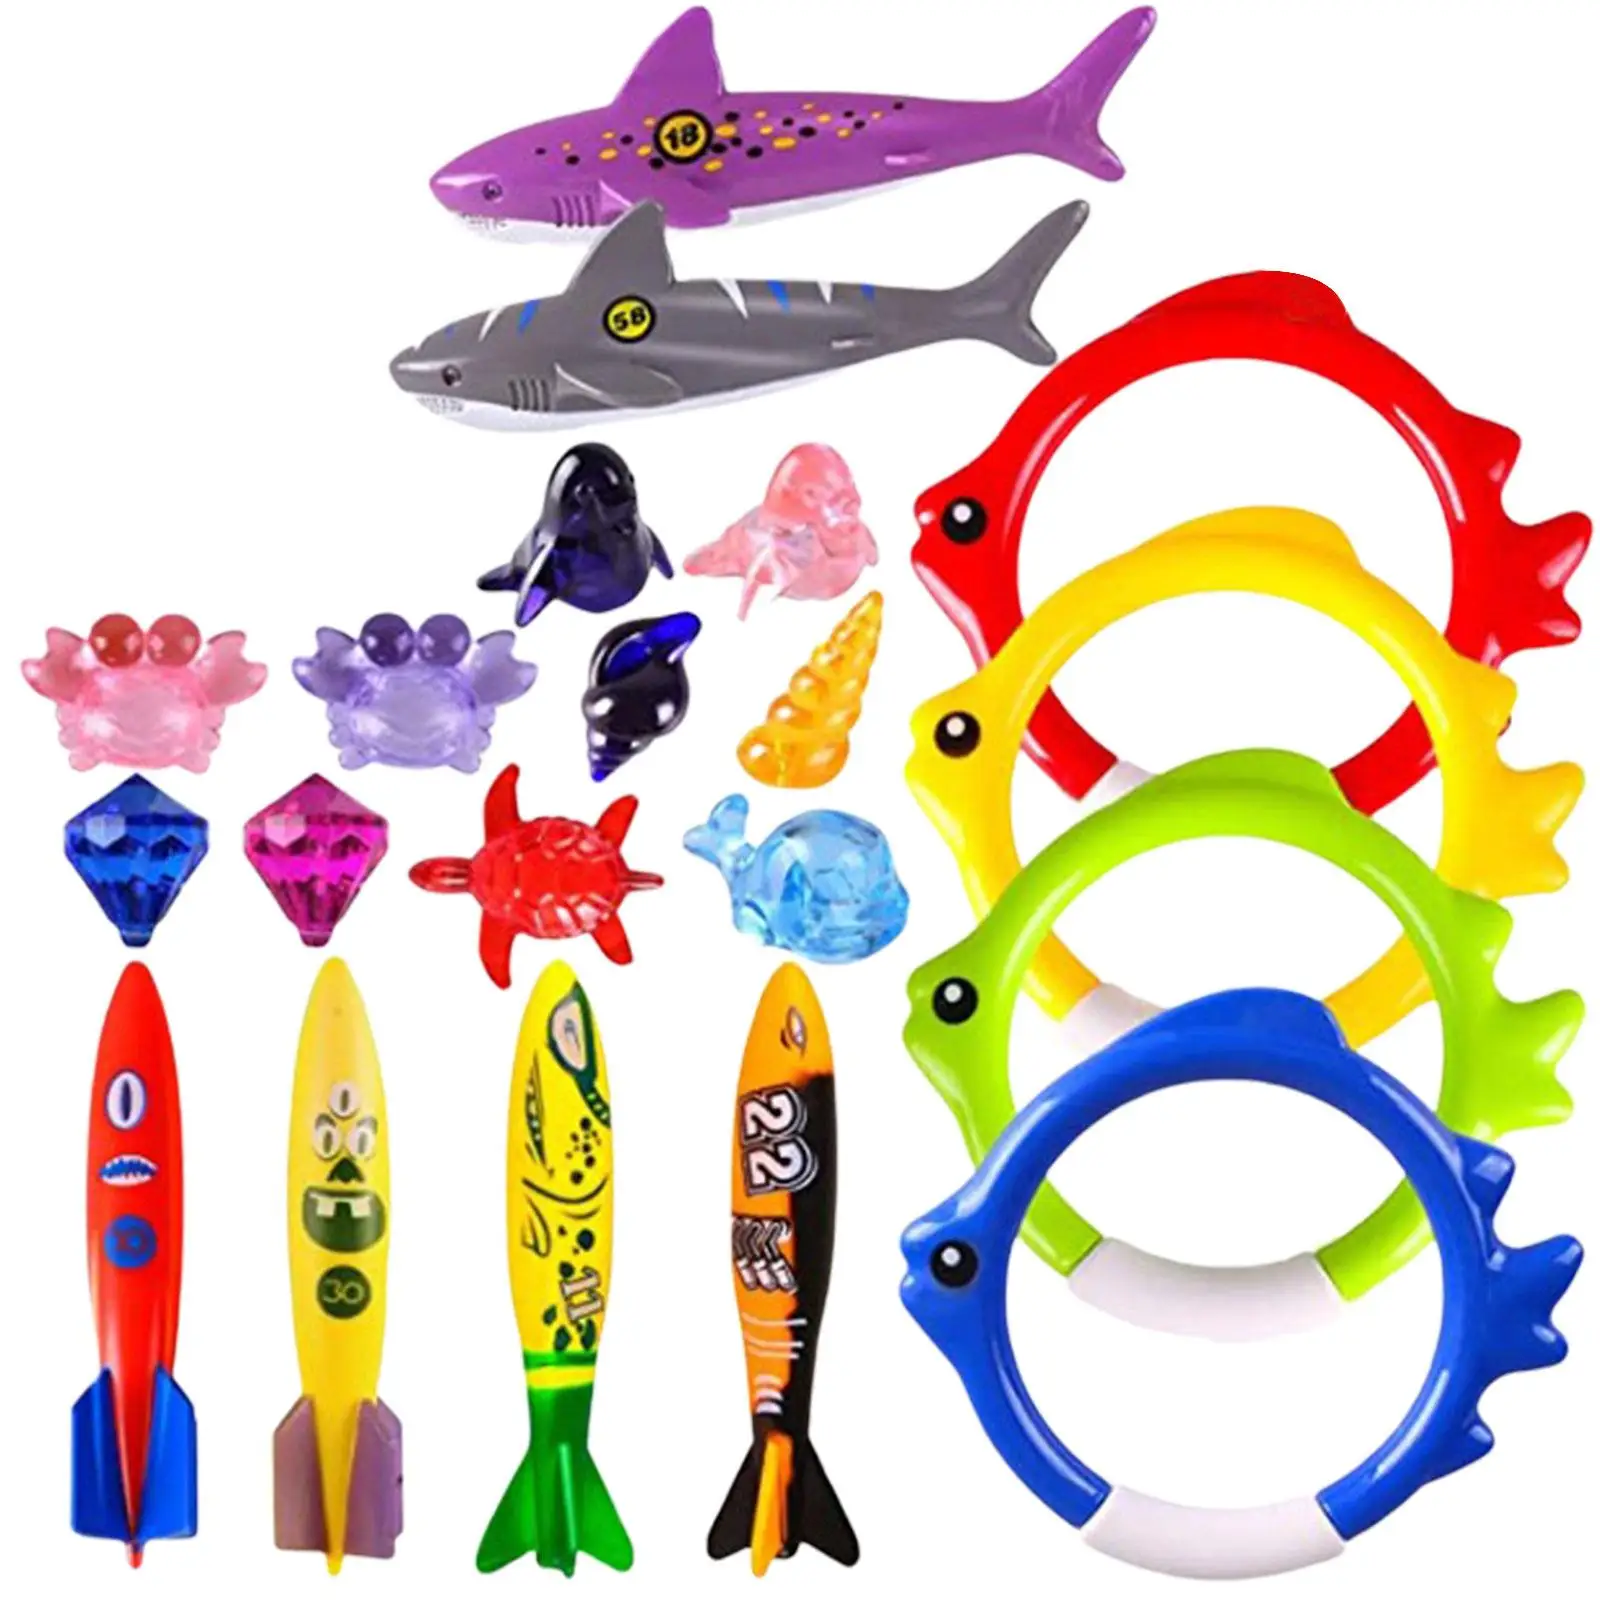 

20 Pieces Underwater Swimming Pool Toys Gems Fun Swim Games Sinking Set for Diving Practice Pool Schools Beach